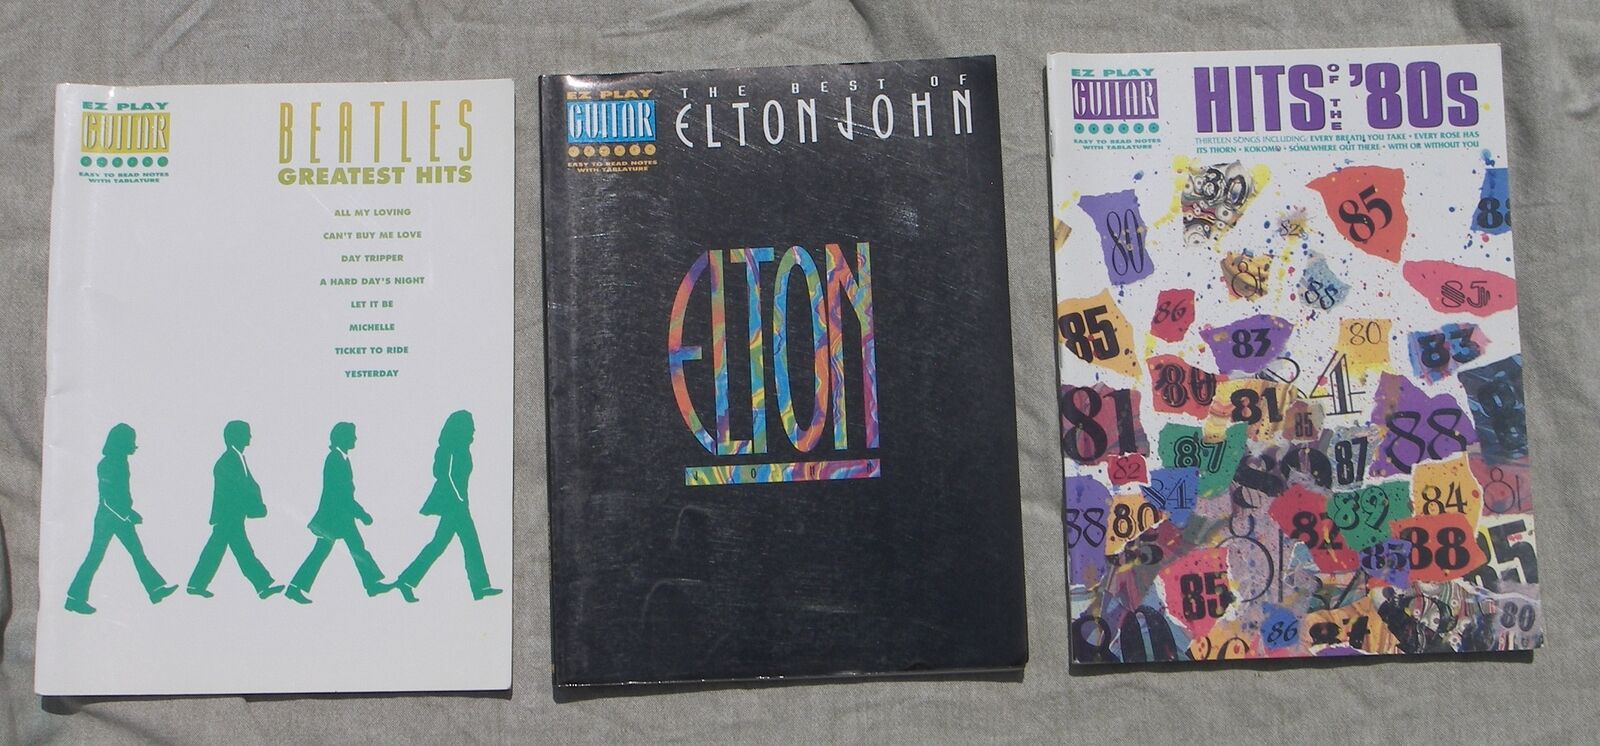 3 Songbook GUITAR Hits of the '80s Best of Elton John Beatles Greatest Hits Без бренда